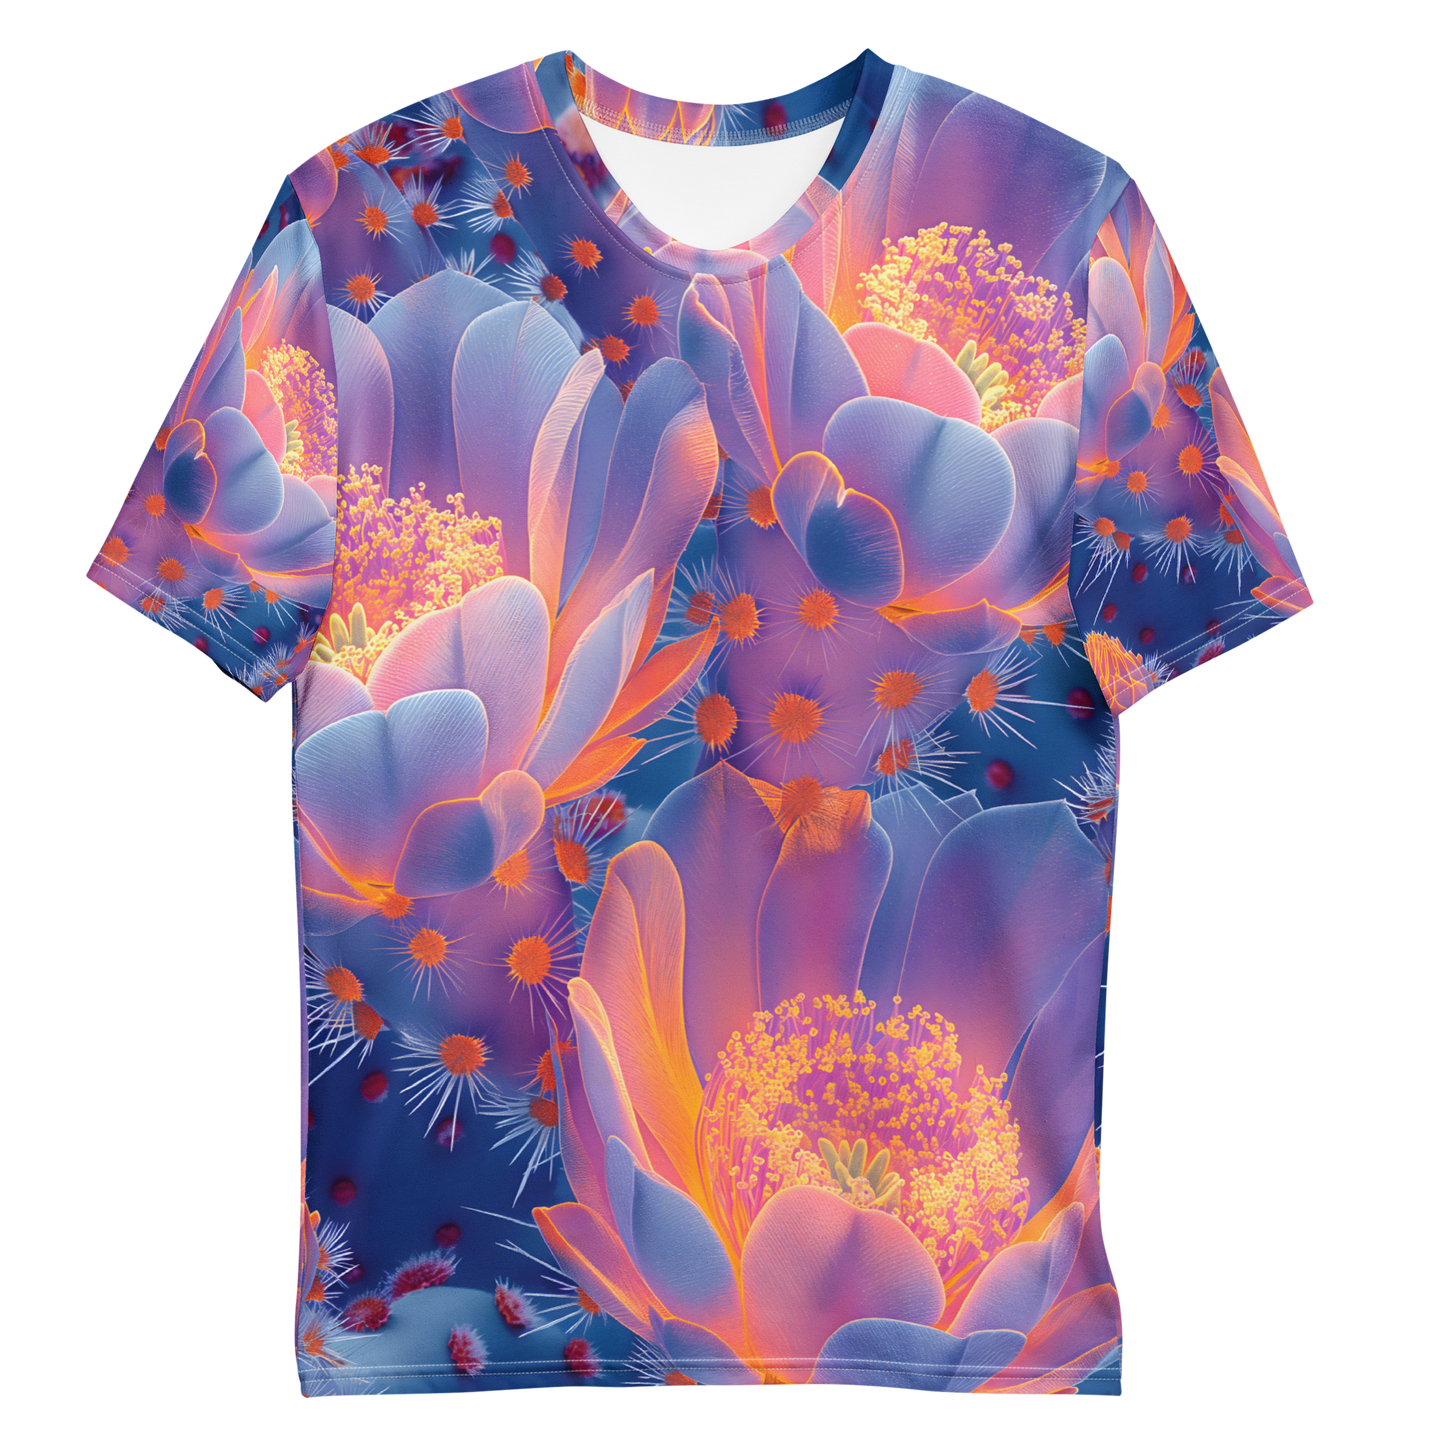 Cactus Glow Men's T-shirt - Psychedelic All Over Print